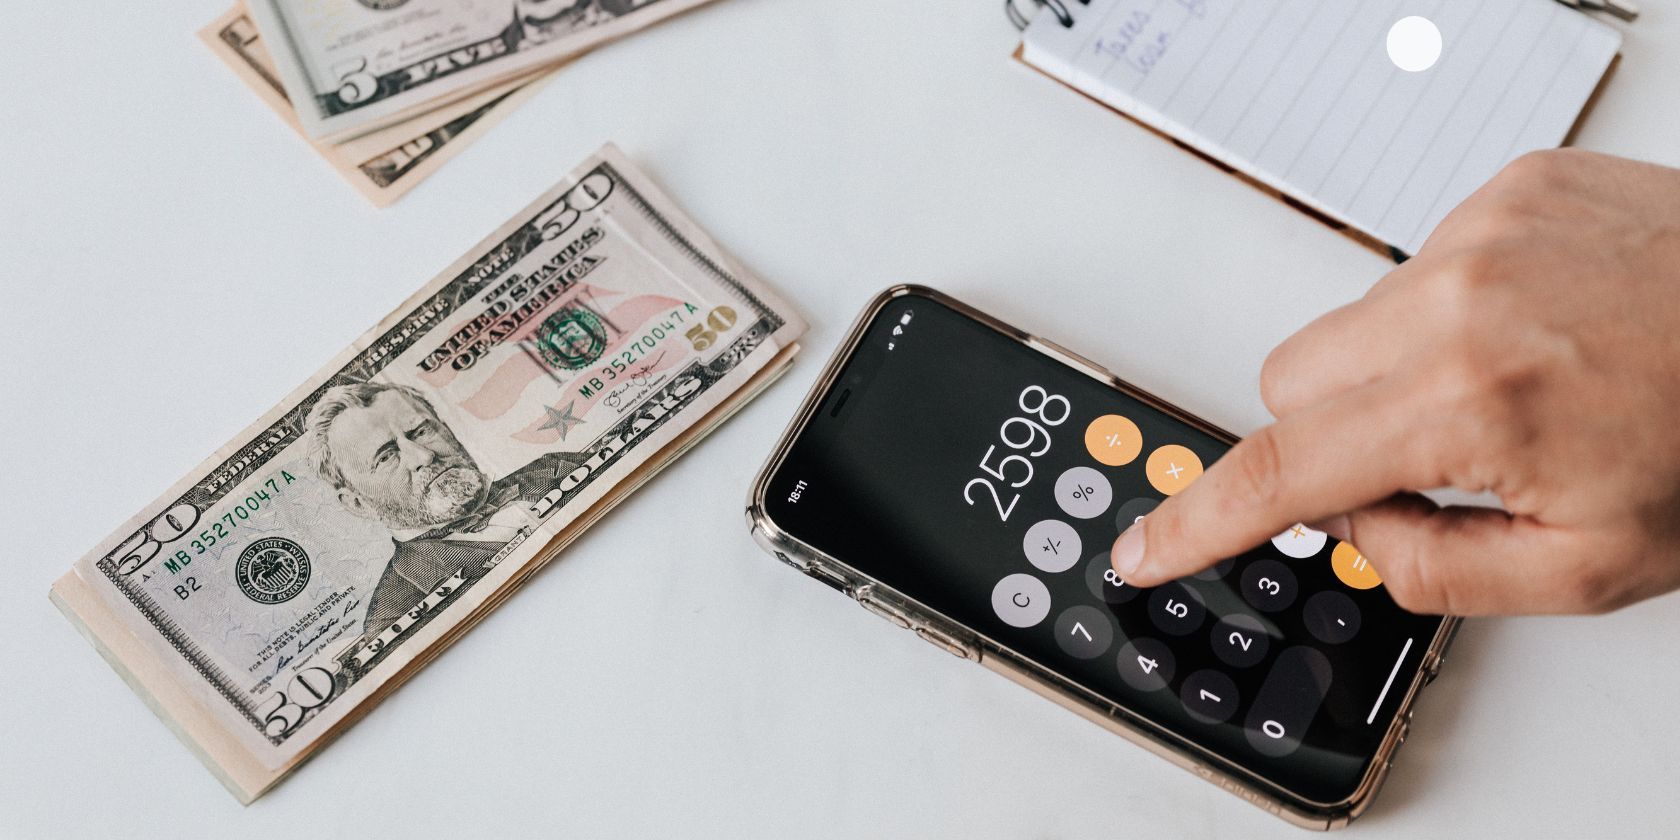 person using the calculator app on a smartphone placed on a table beside dollar bills and a notebook